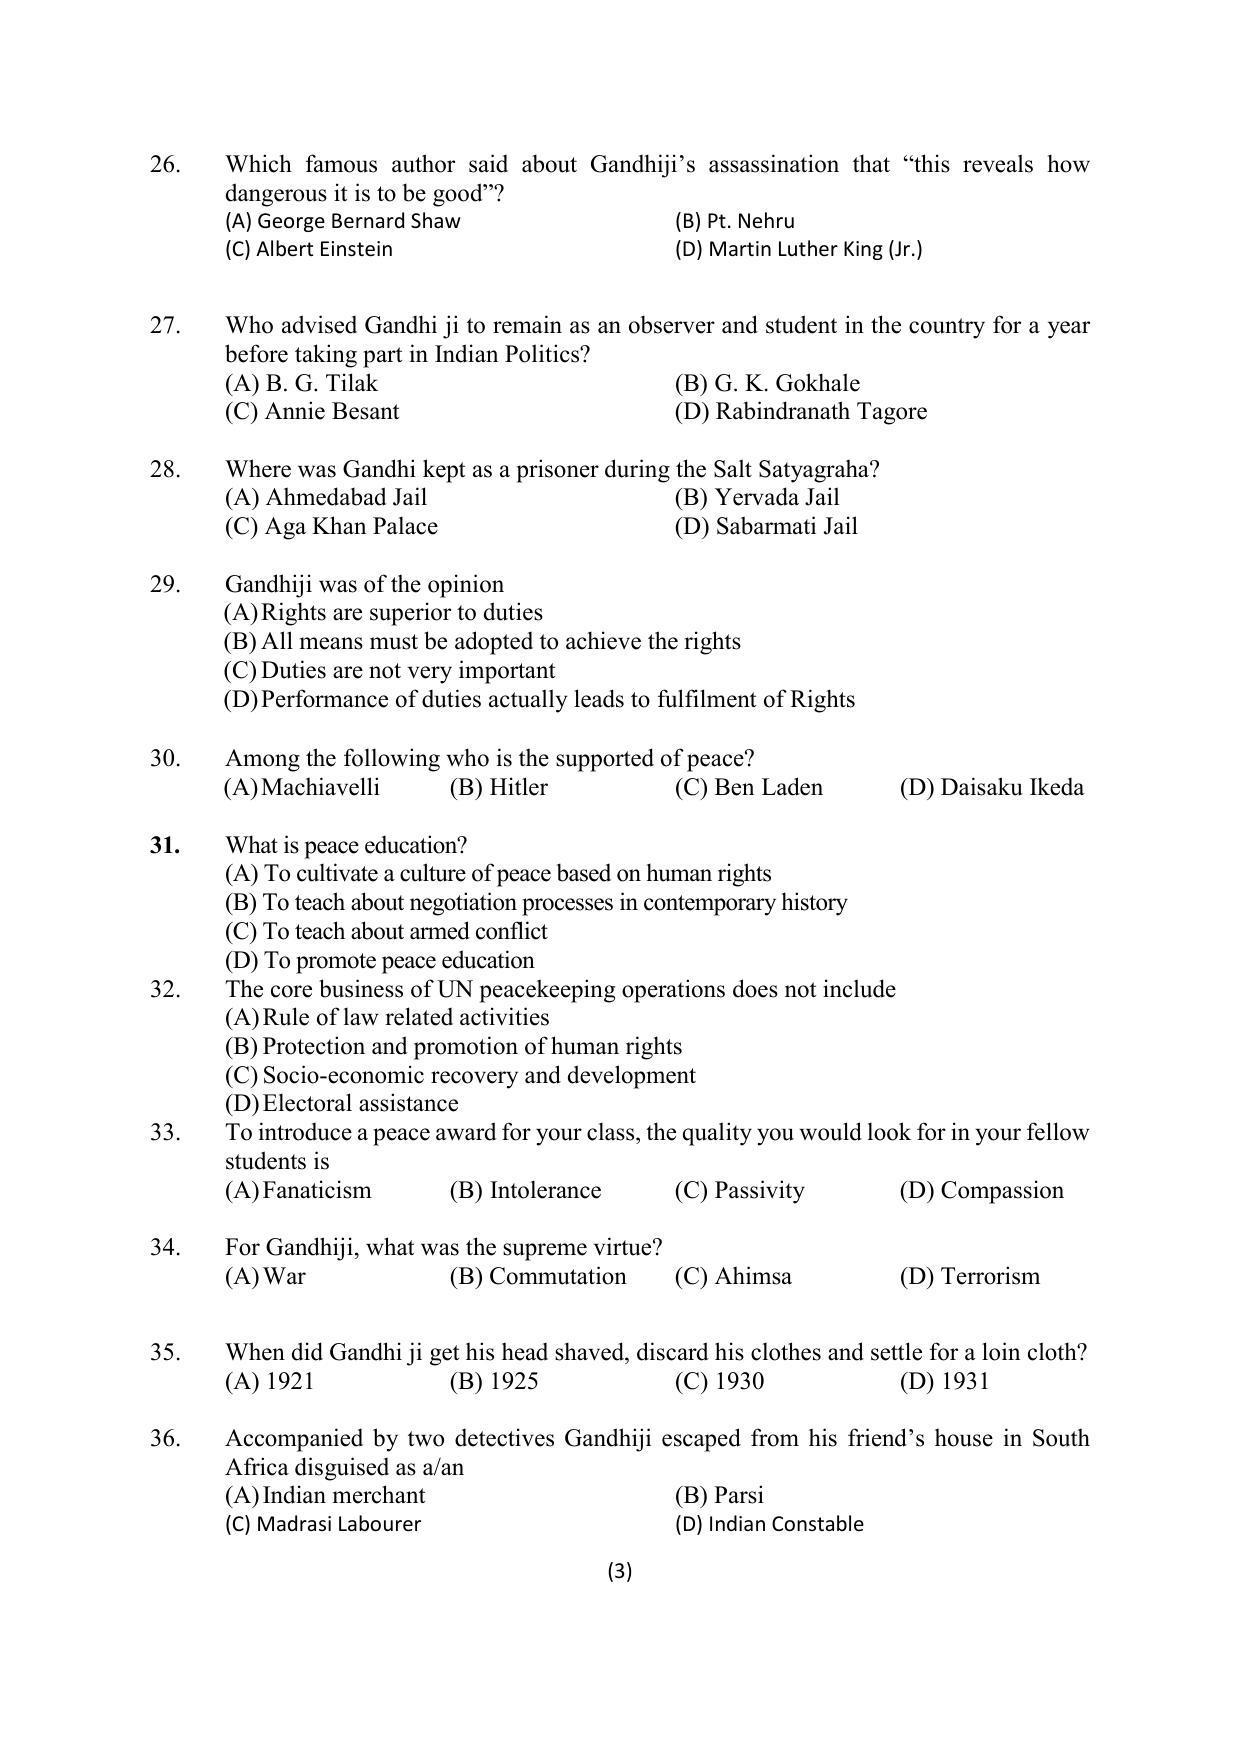 PU MPET Ancient Indian History & Archeology 2022 Question Papers - Page 15